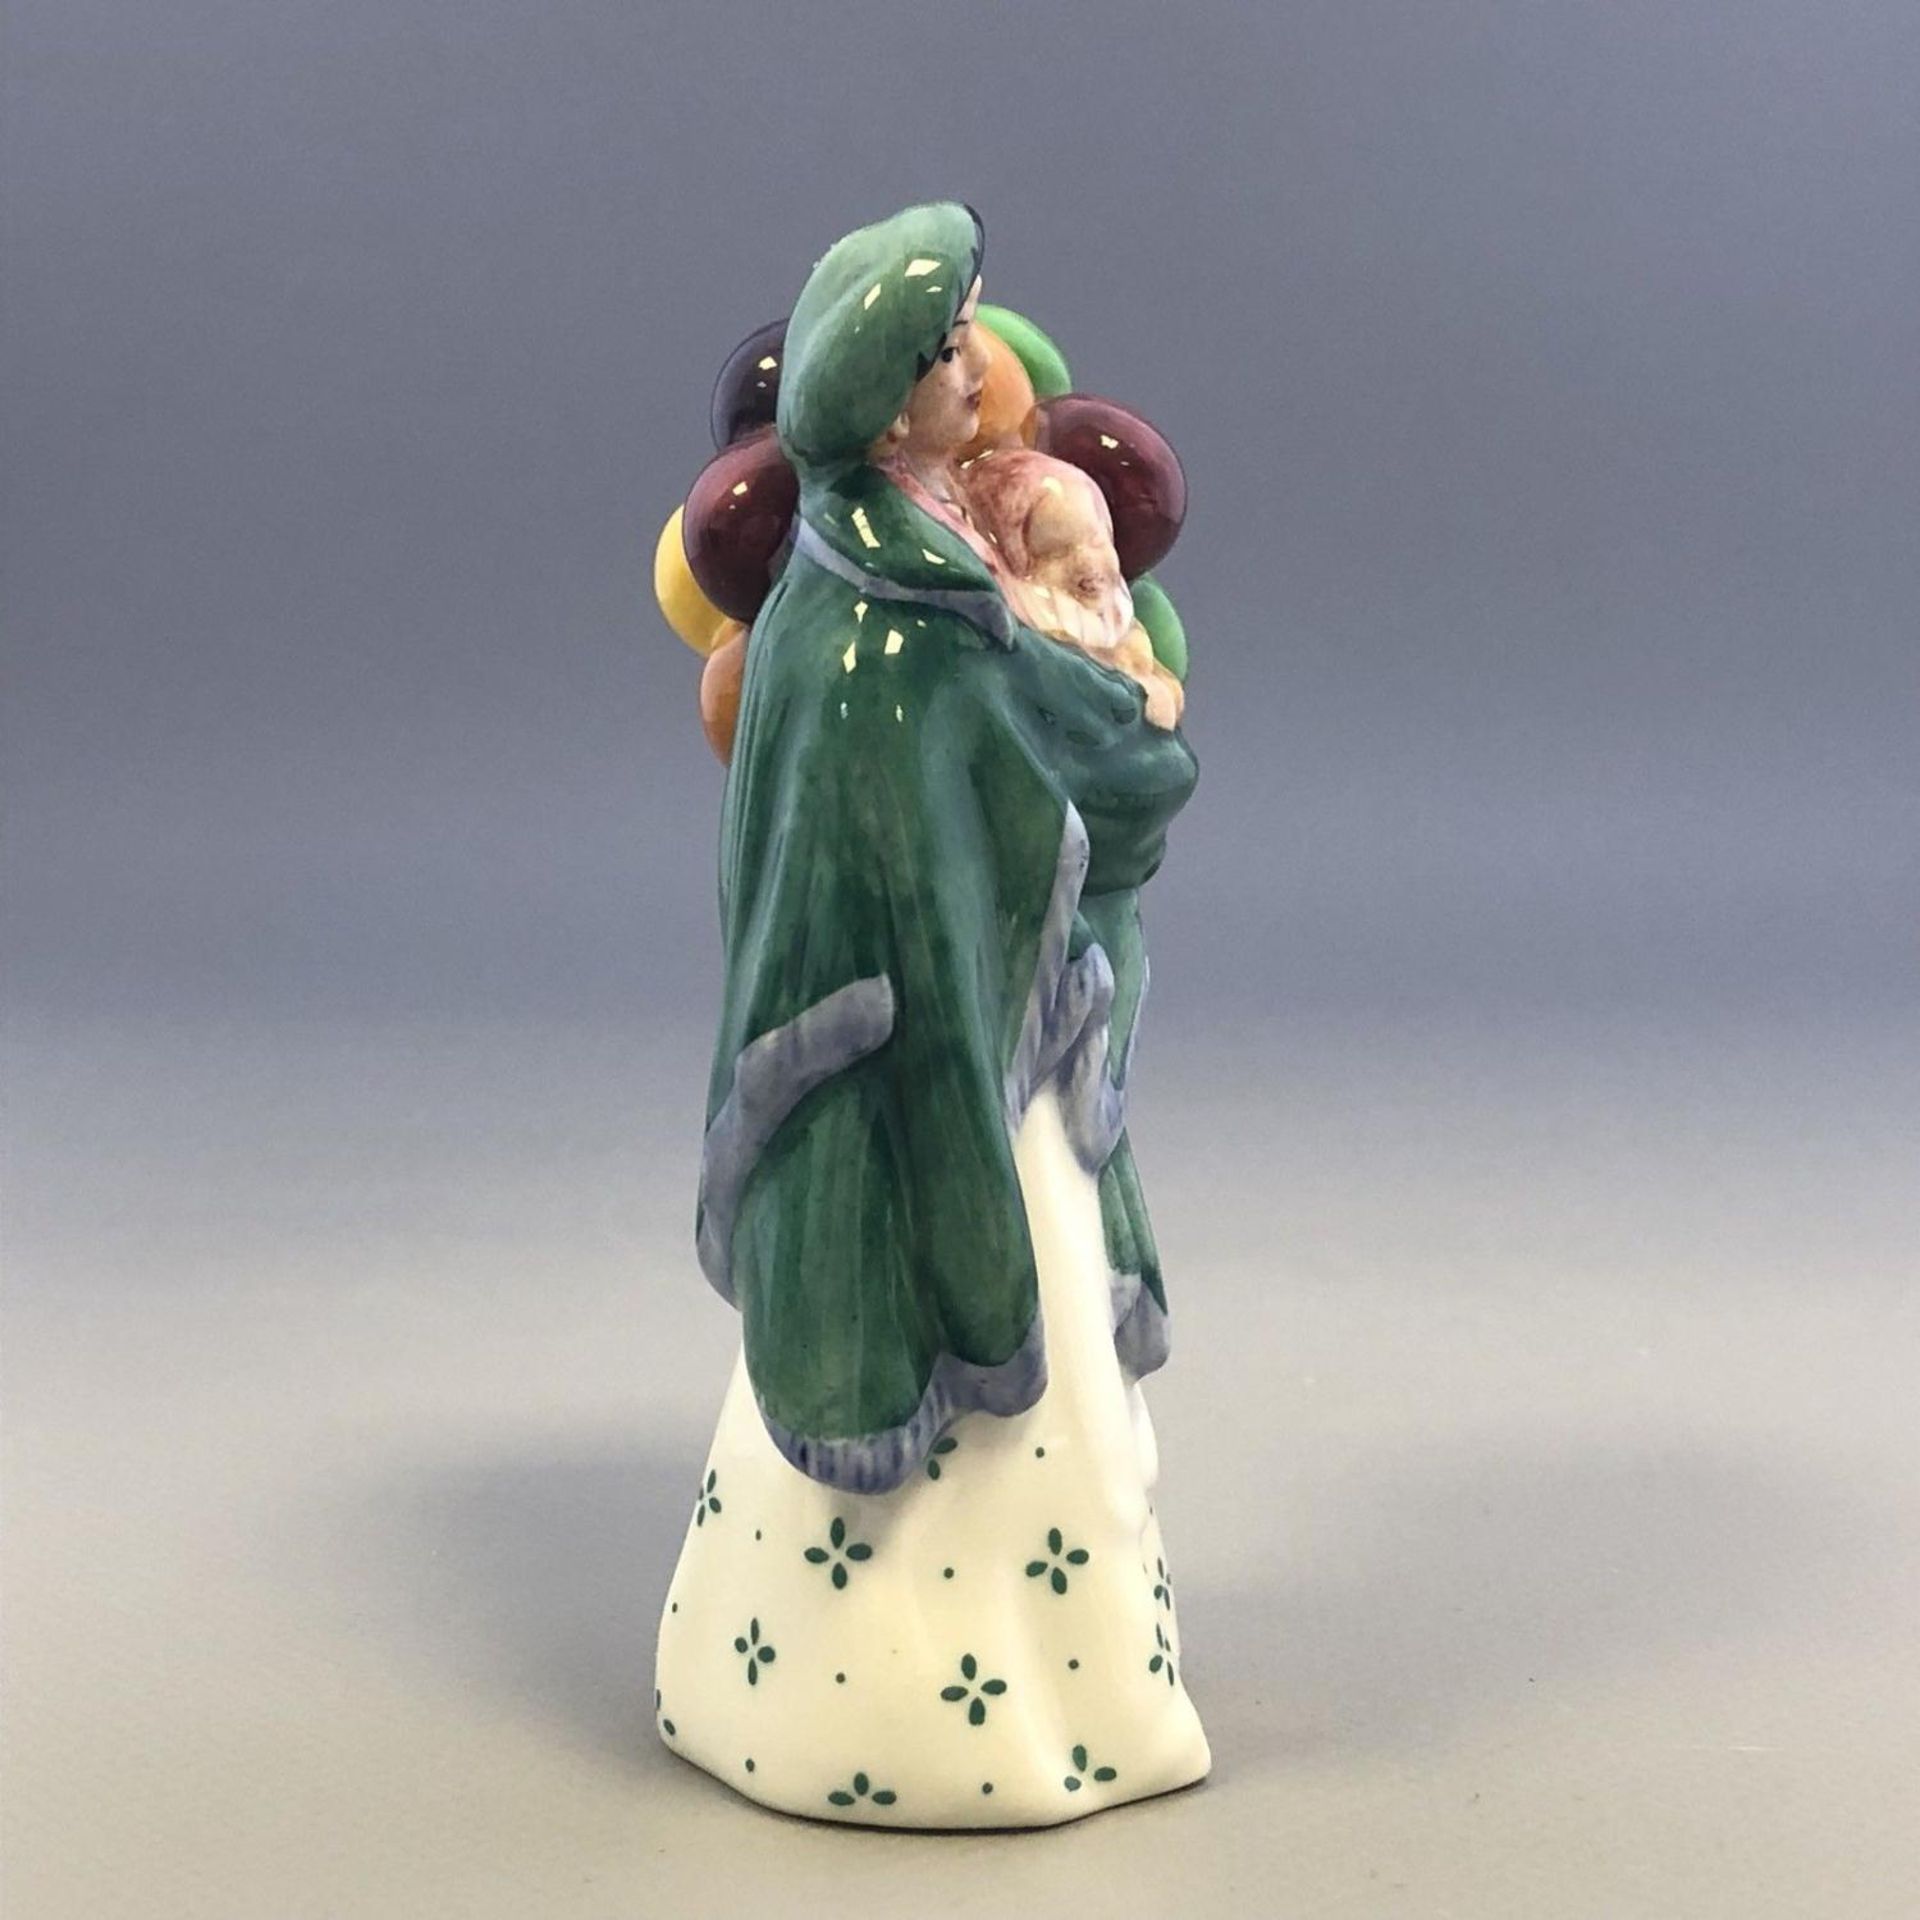 Miniature Royal Doulton Porcelain Figurine - HN 2130 THE BALLOON SELLER with baby - Image 2 of 6